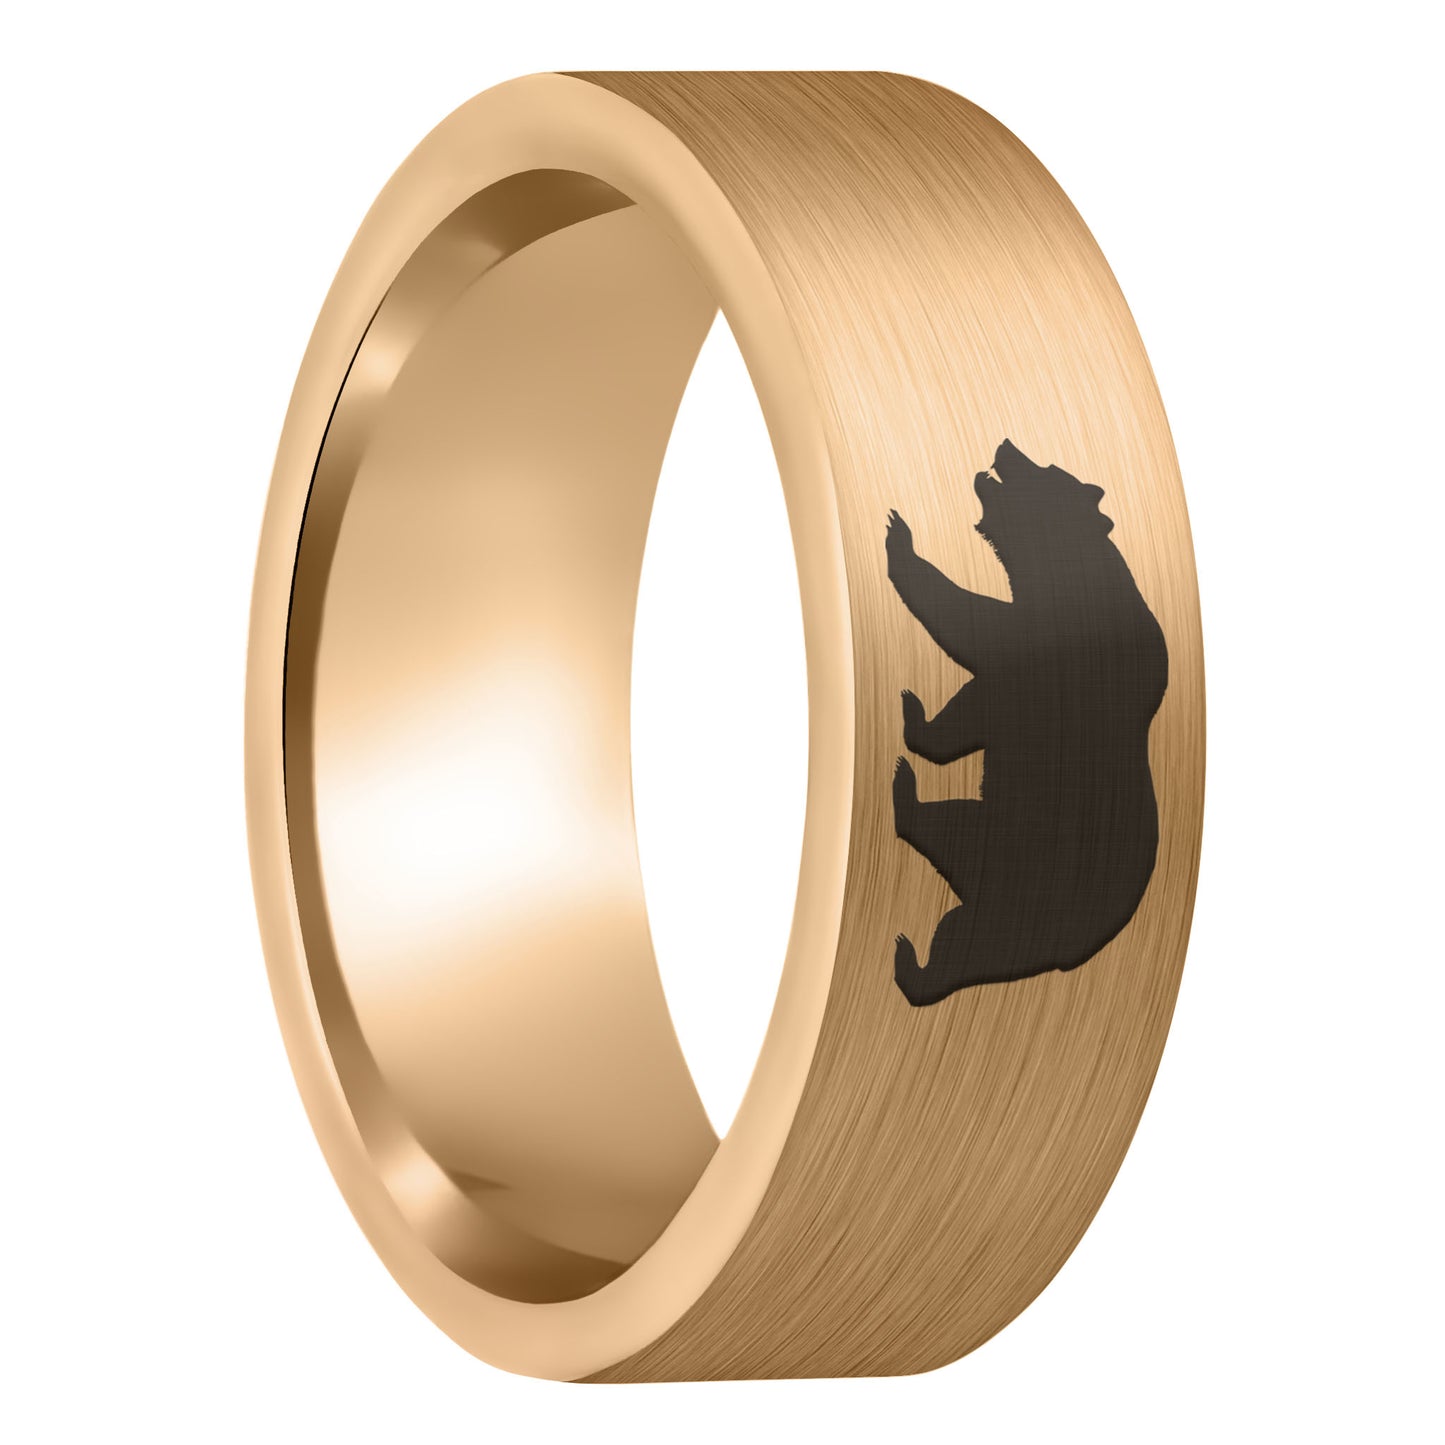 A bear brushed rose gold tungsten men's wedding band displayed on a plain white background.